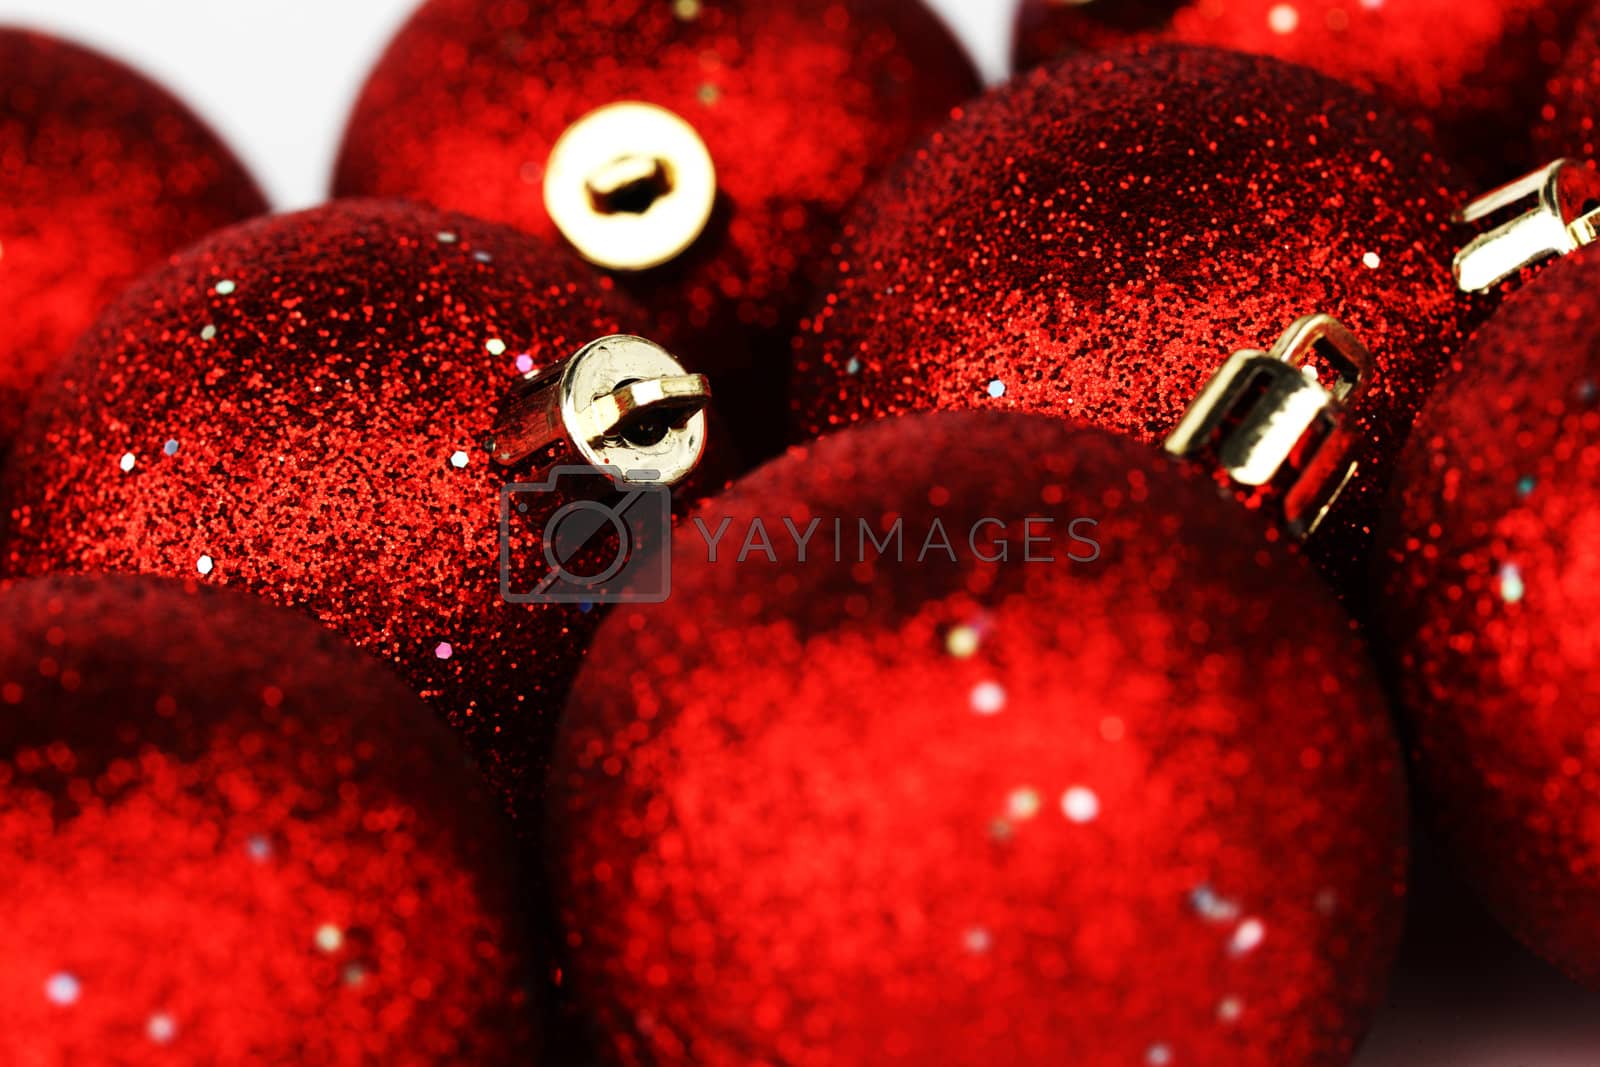 Royalty free image of red christmas ball by Yellowj